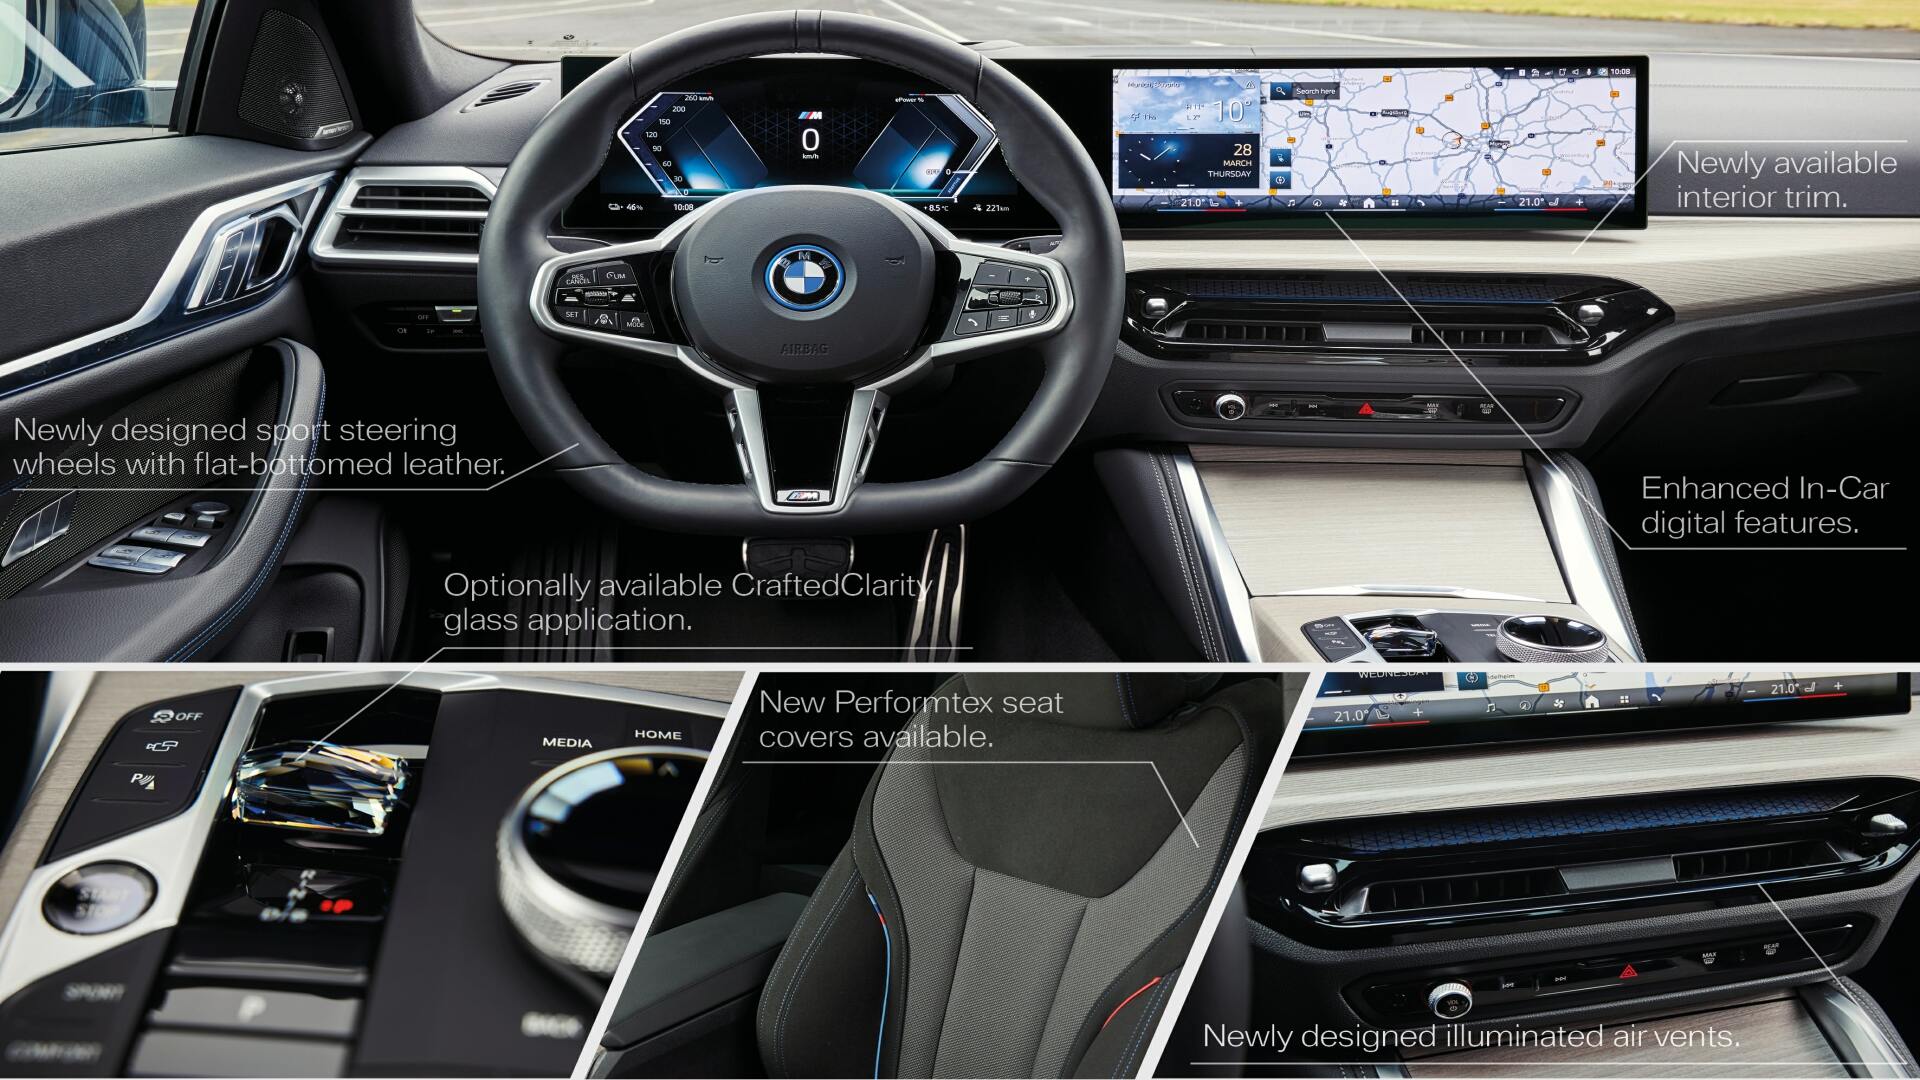 The Interior Highlights Of The BMW i4 (Credits BMW Pressroom)